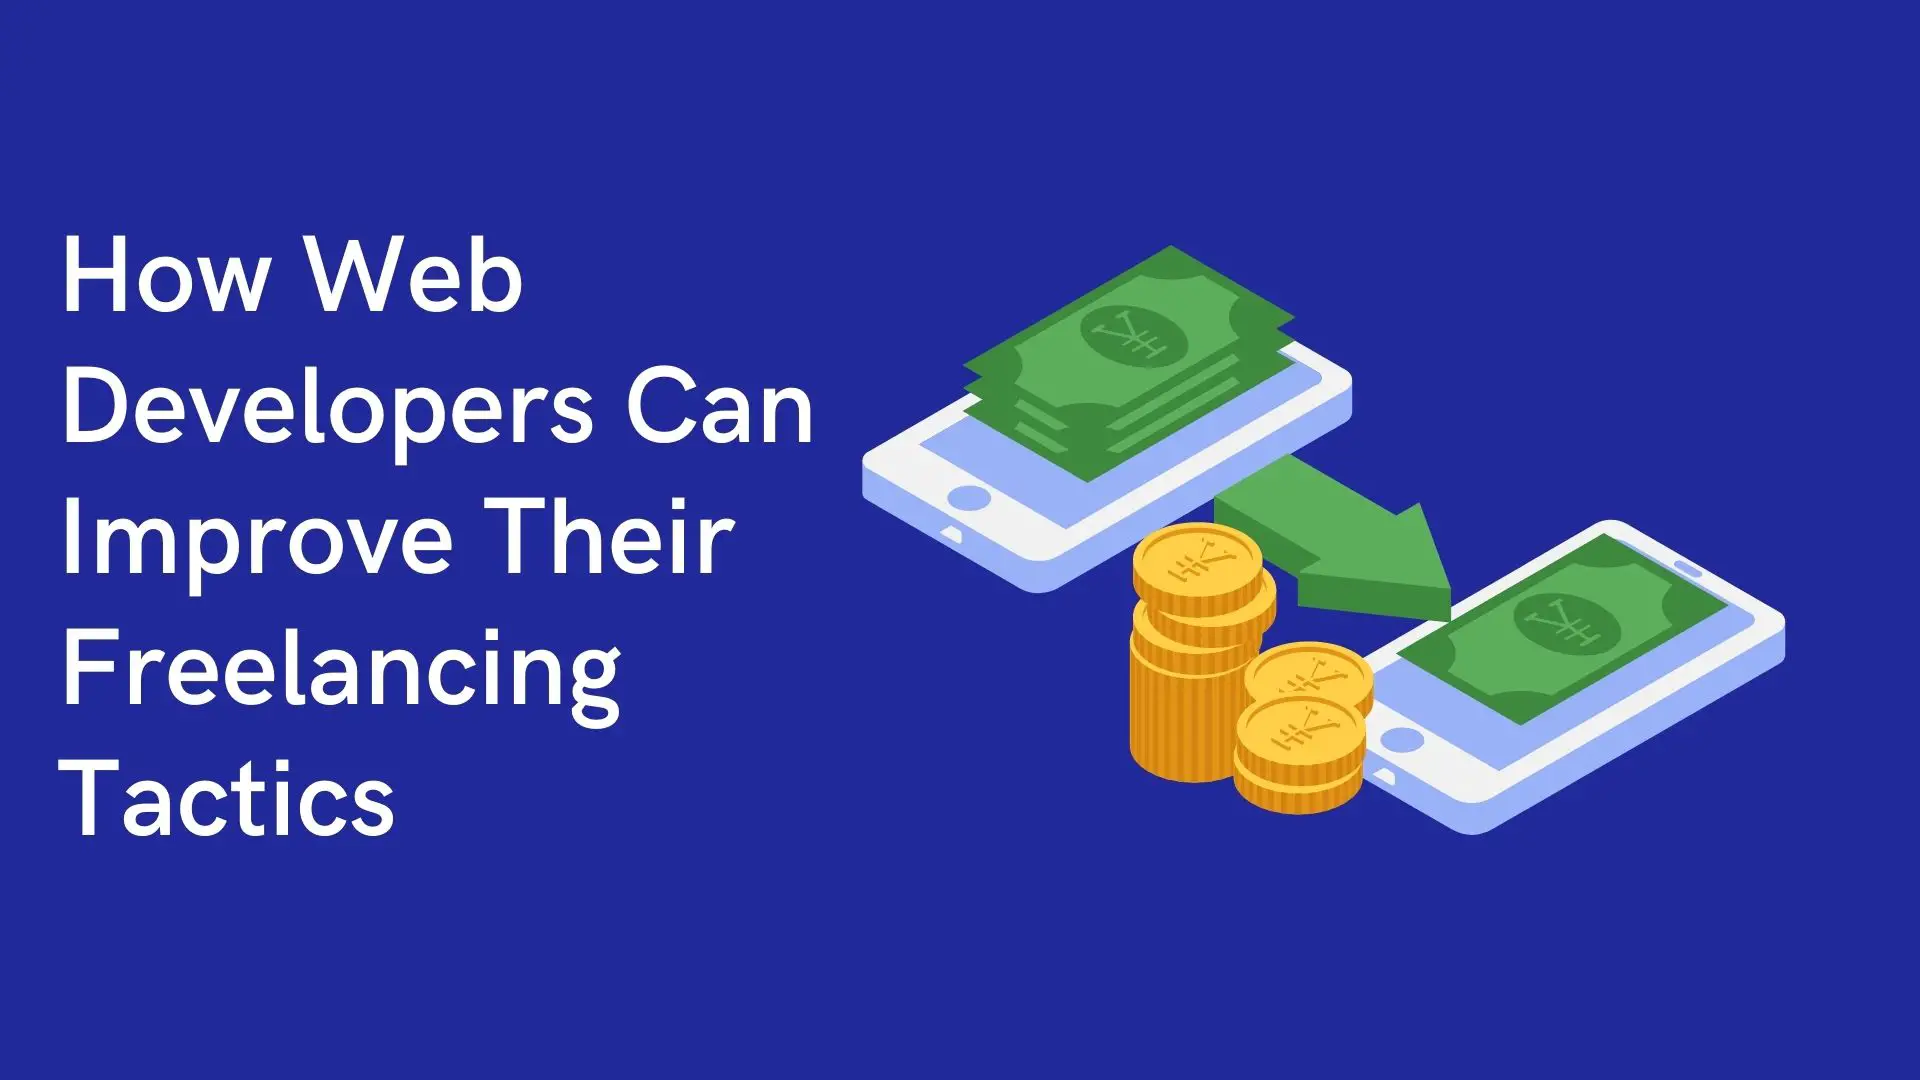 How Web Developers Can Improve Their Freelancing Tactics